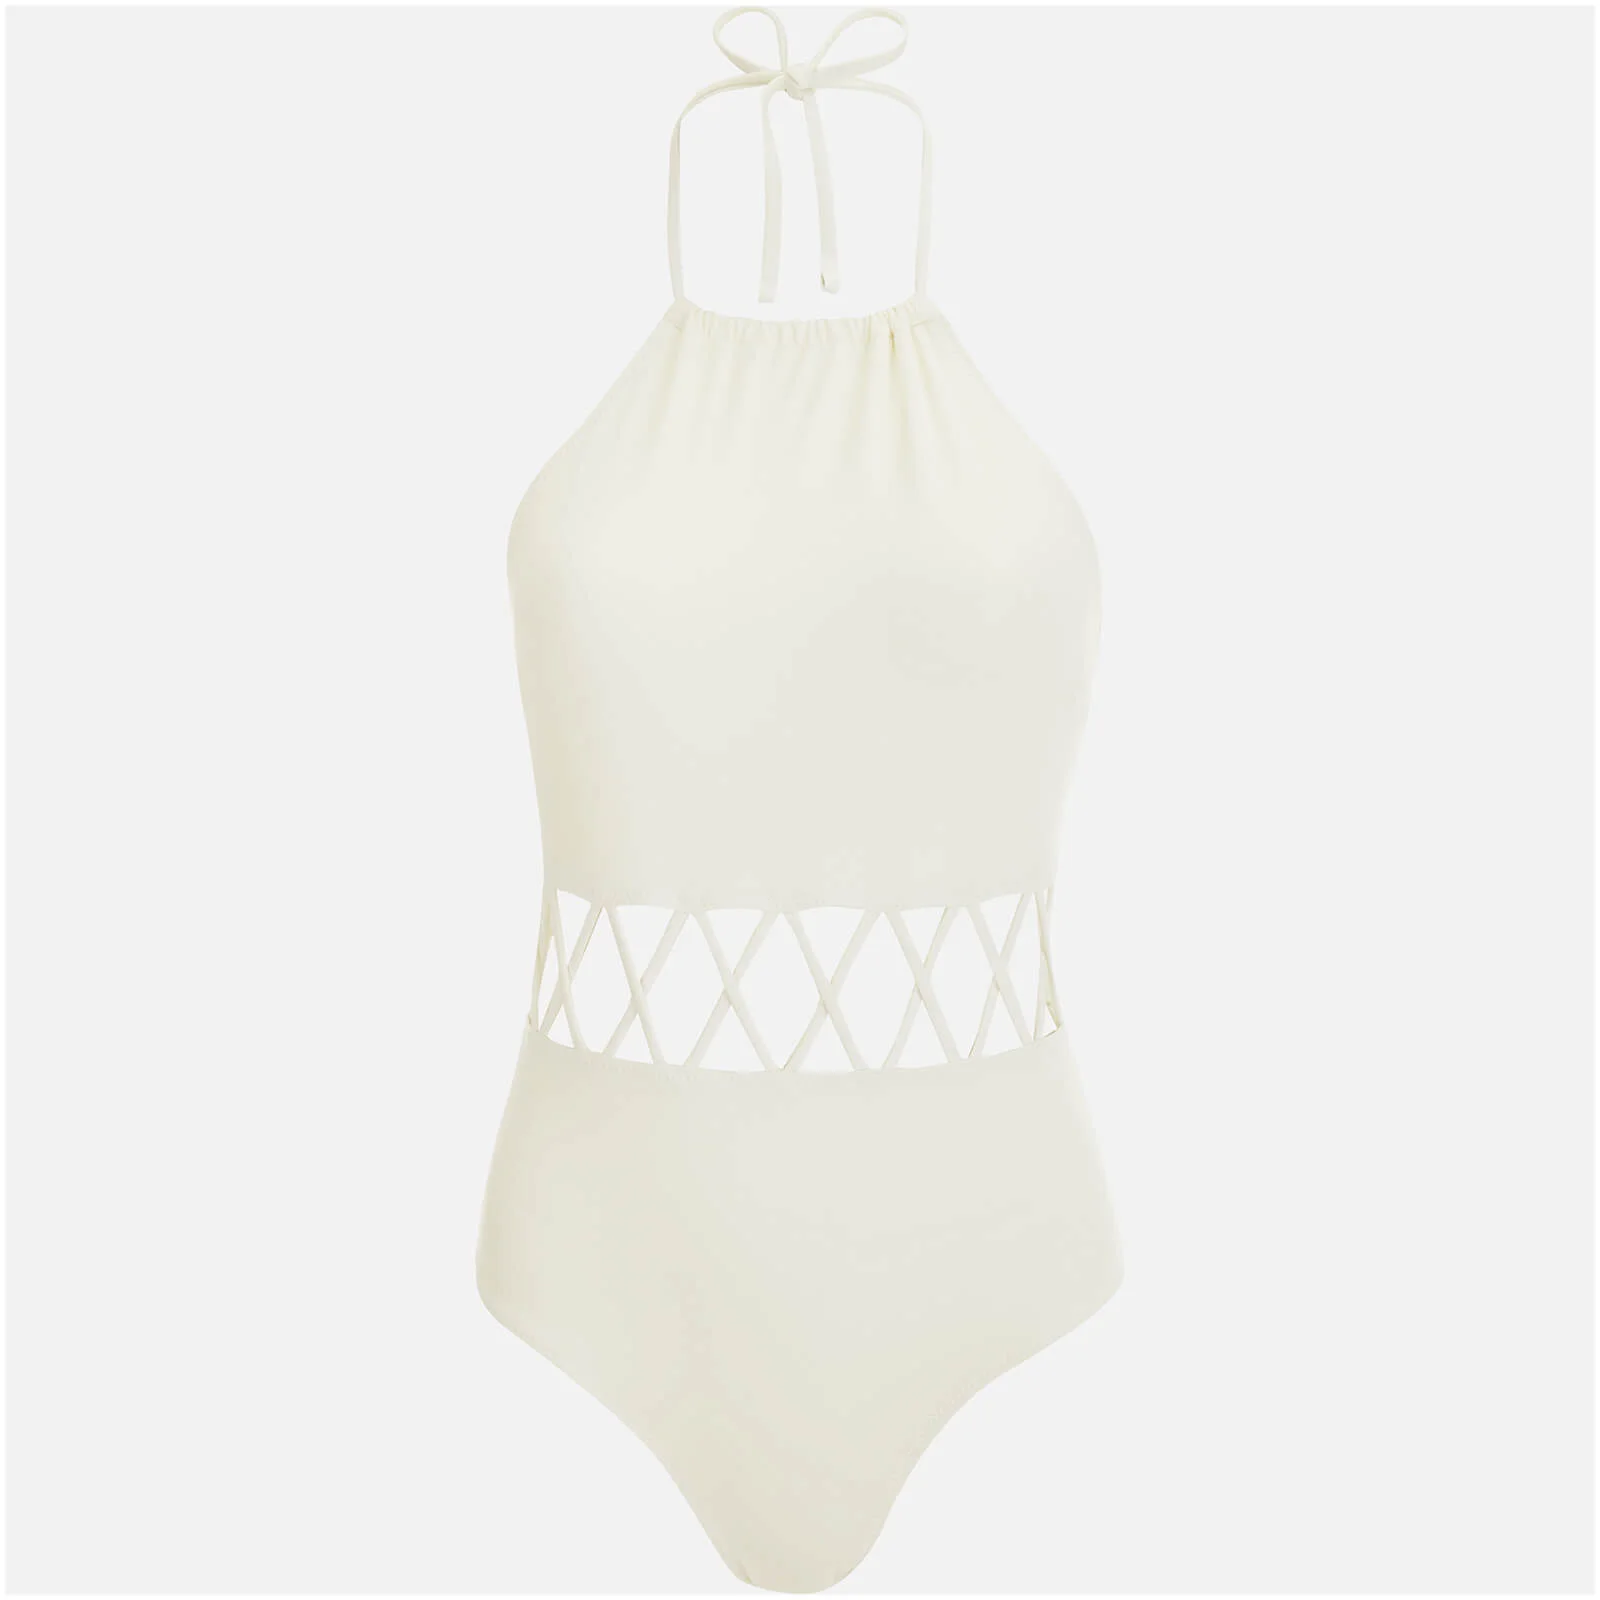 Solid & Striped Women's The Barbara Swimsuit - Cream Image 1